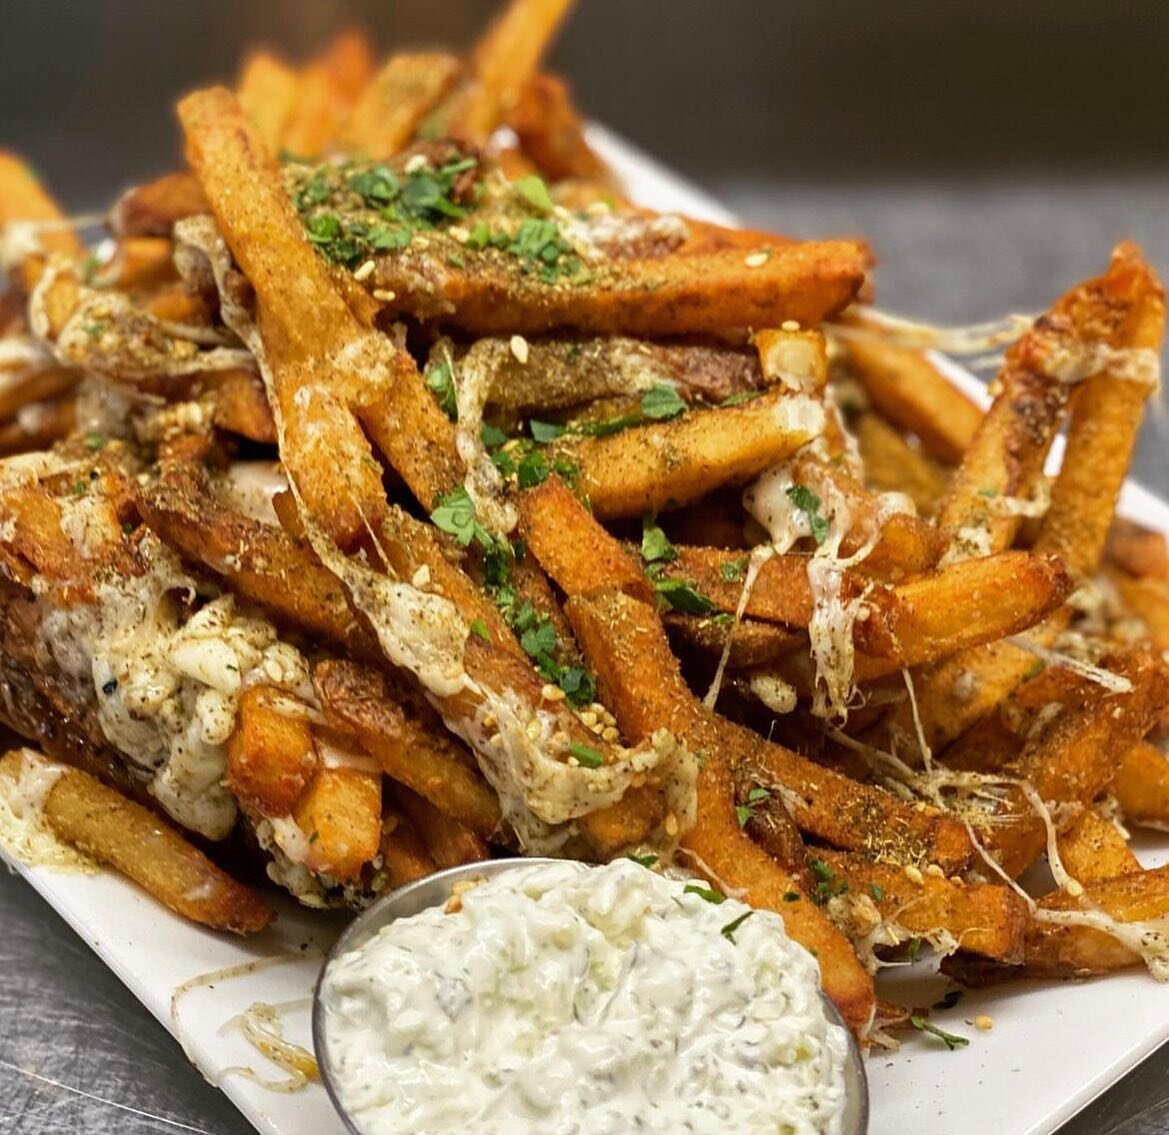 Za'atar Cheese Fries 🍟 our triple
cooked, hand-cut fries, melty Armenian string cheese, Lebanese za'atar, house tzatziki 👏🏽
these are some seriously international #cheesefries #zaatar #tzatziki #frenchfries #semolinaspecials #takeout #delivery @to